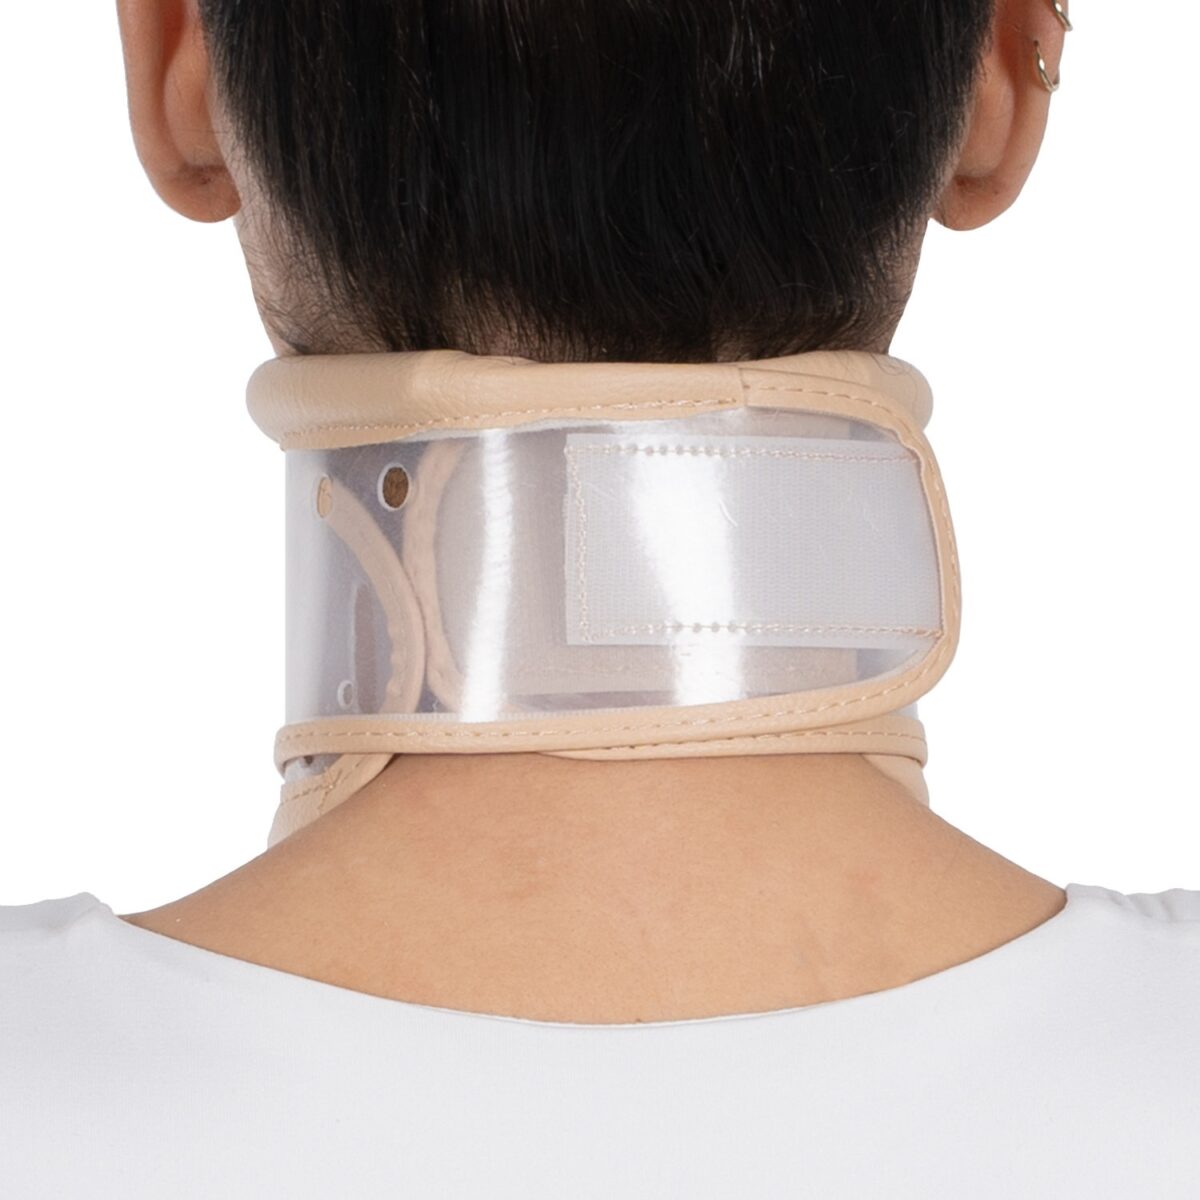 wingmed orthopedic equipments W107 adjustable pvc cervical collar with a chin support product 2 1